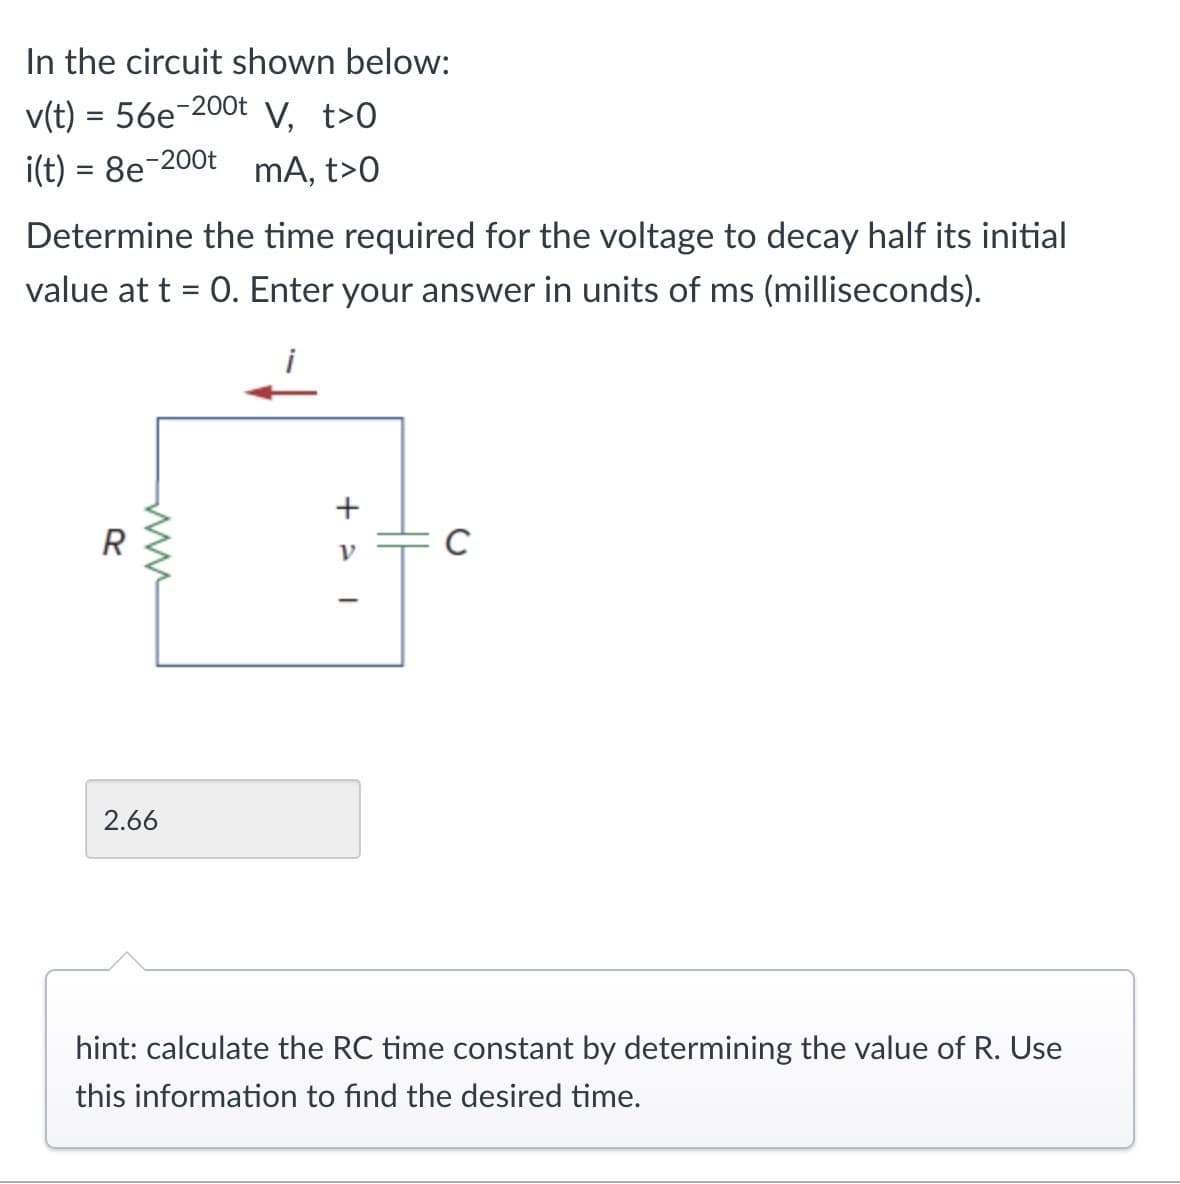 In the circuit shown below:
v(t)=56e-200t V, t>O
i(t) = 8e-200 mA, t>O
Determine the time required for the voltage to decay half its initial
value at t = 0. Enter your answer in units of ms (milliseconds).
2.66
R
www
<+
ν
C
hint: calculate the RC time constant by determining the value of R. Use
this information to find the desired time.